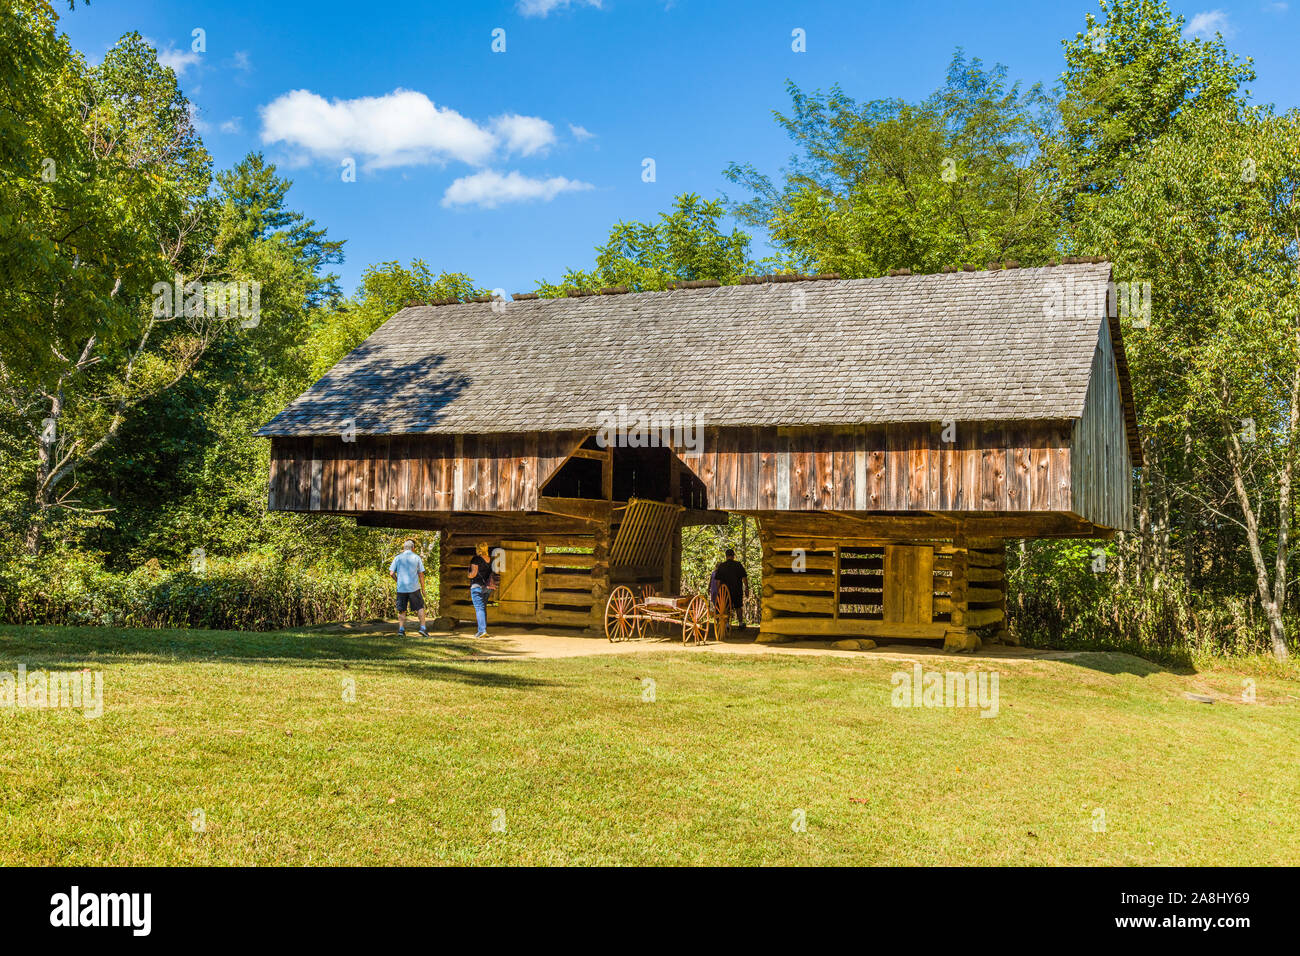 Cantilever barn at the Tipton house  in Cades Cove in the Great Smoky Mountains National Park in Tennessee in the United States Stock Photo